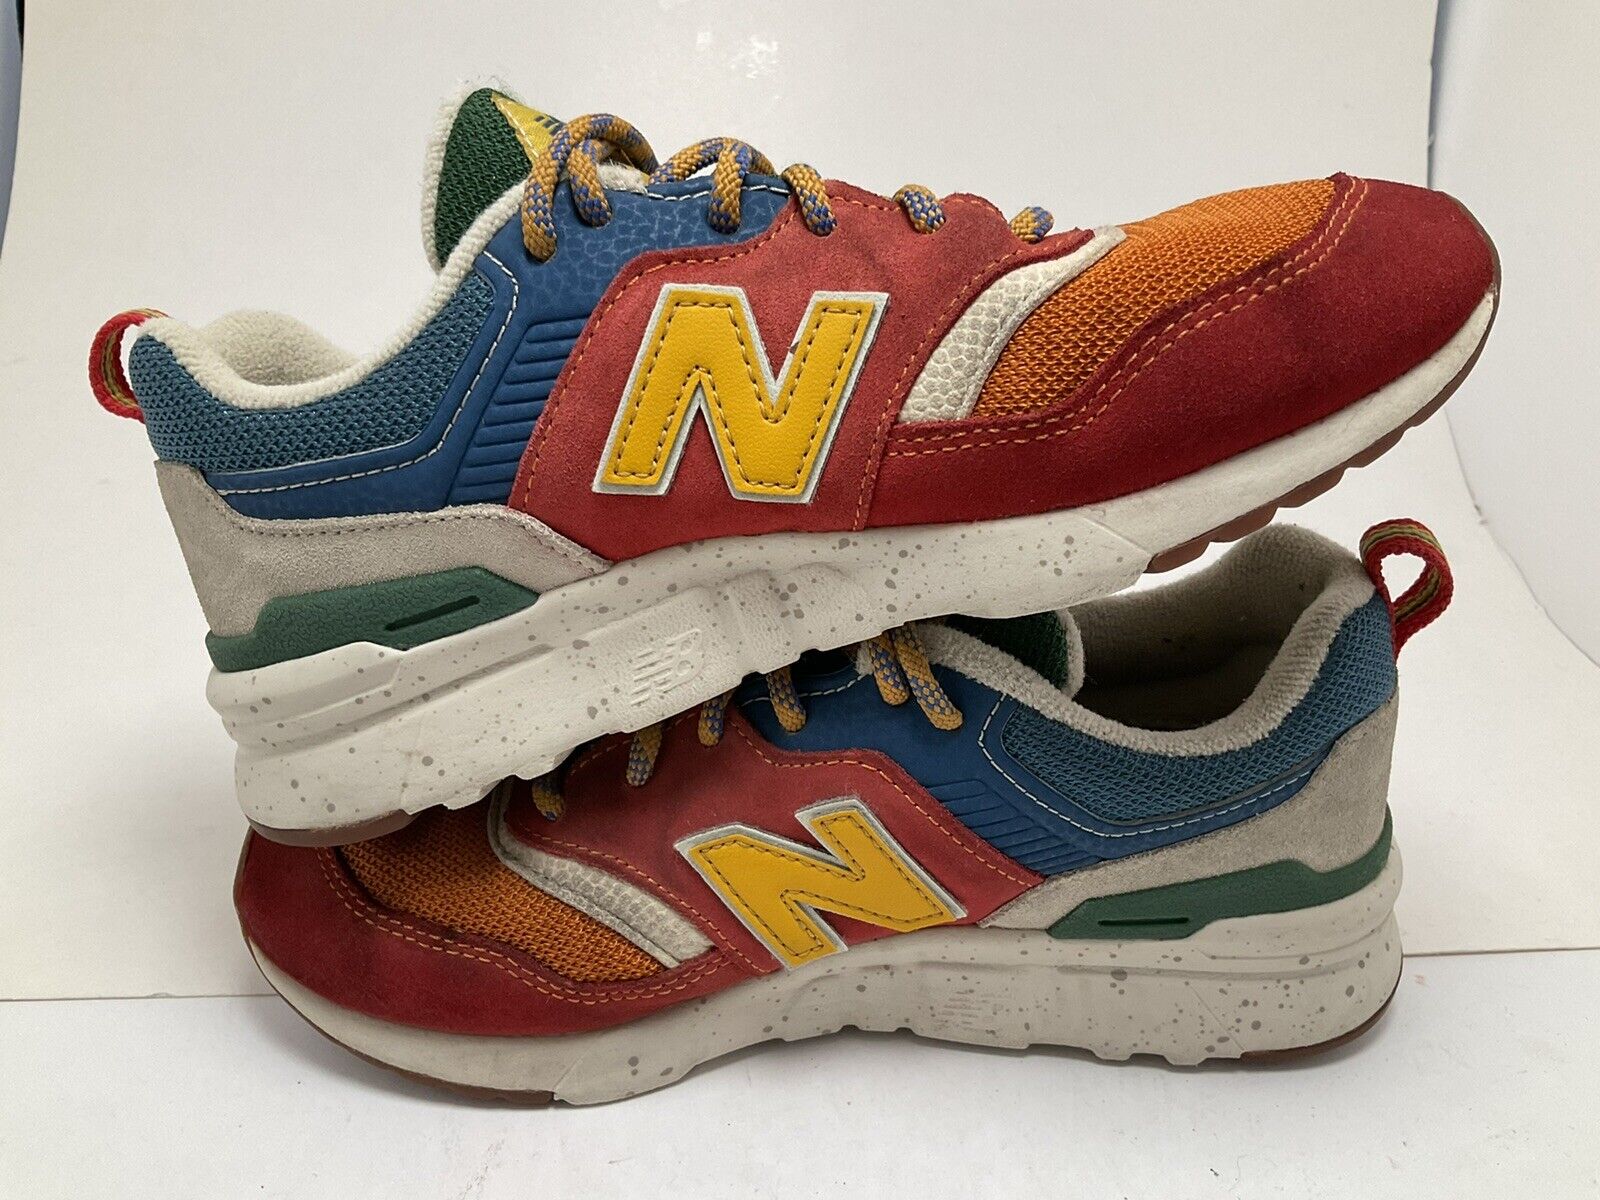 New Balance 997 Cordura Athletic Sneakers GR997HCZ Multicolor Size 2Youth